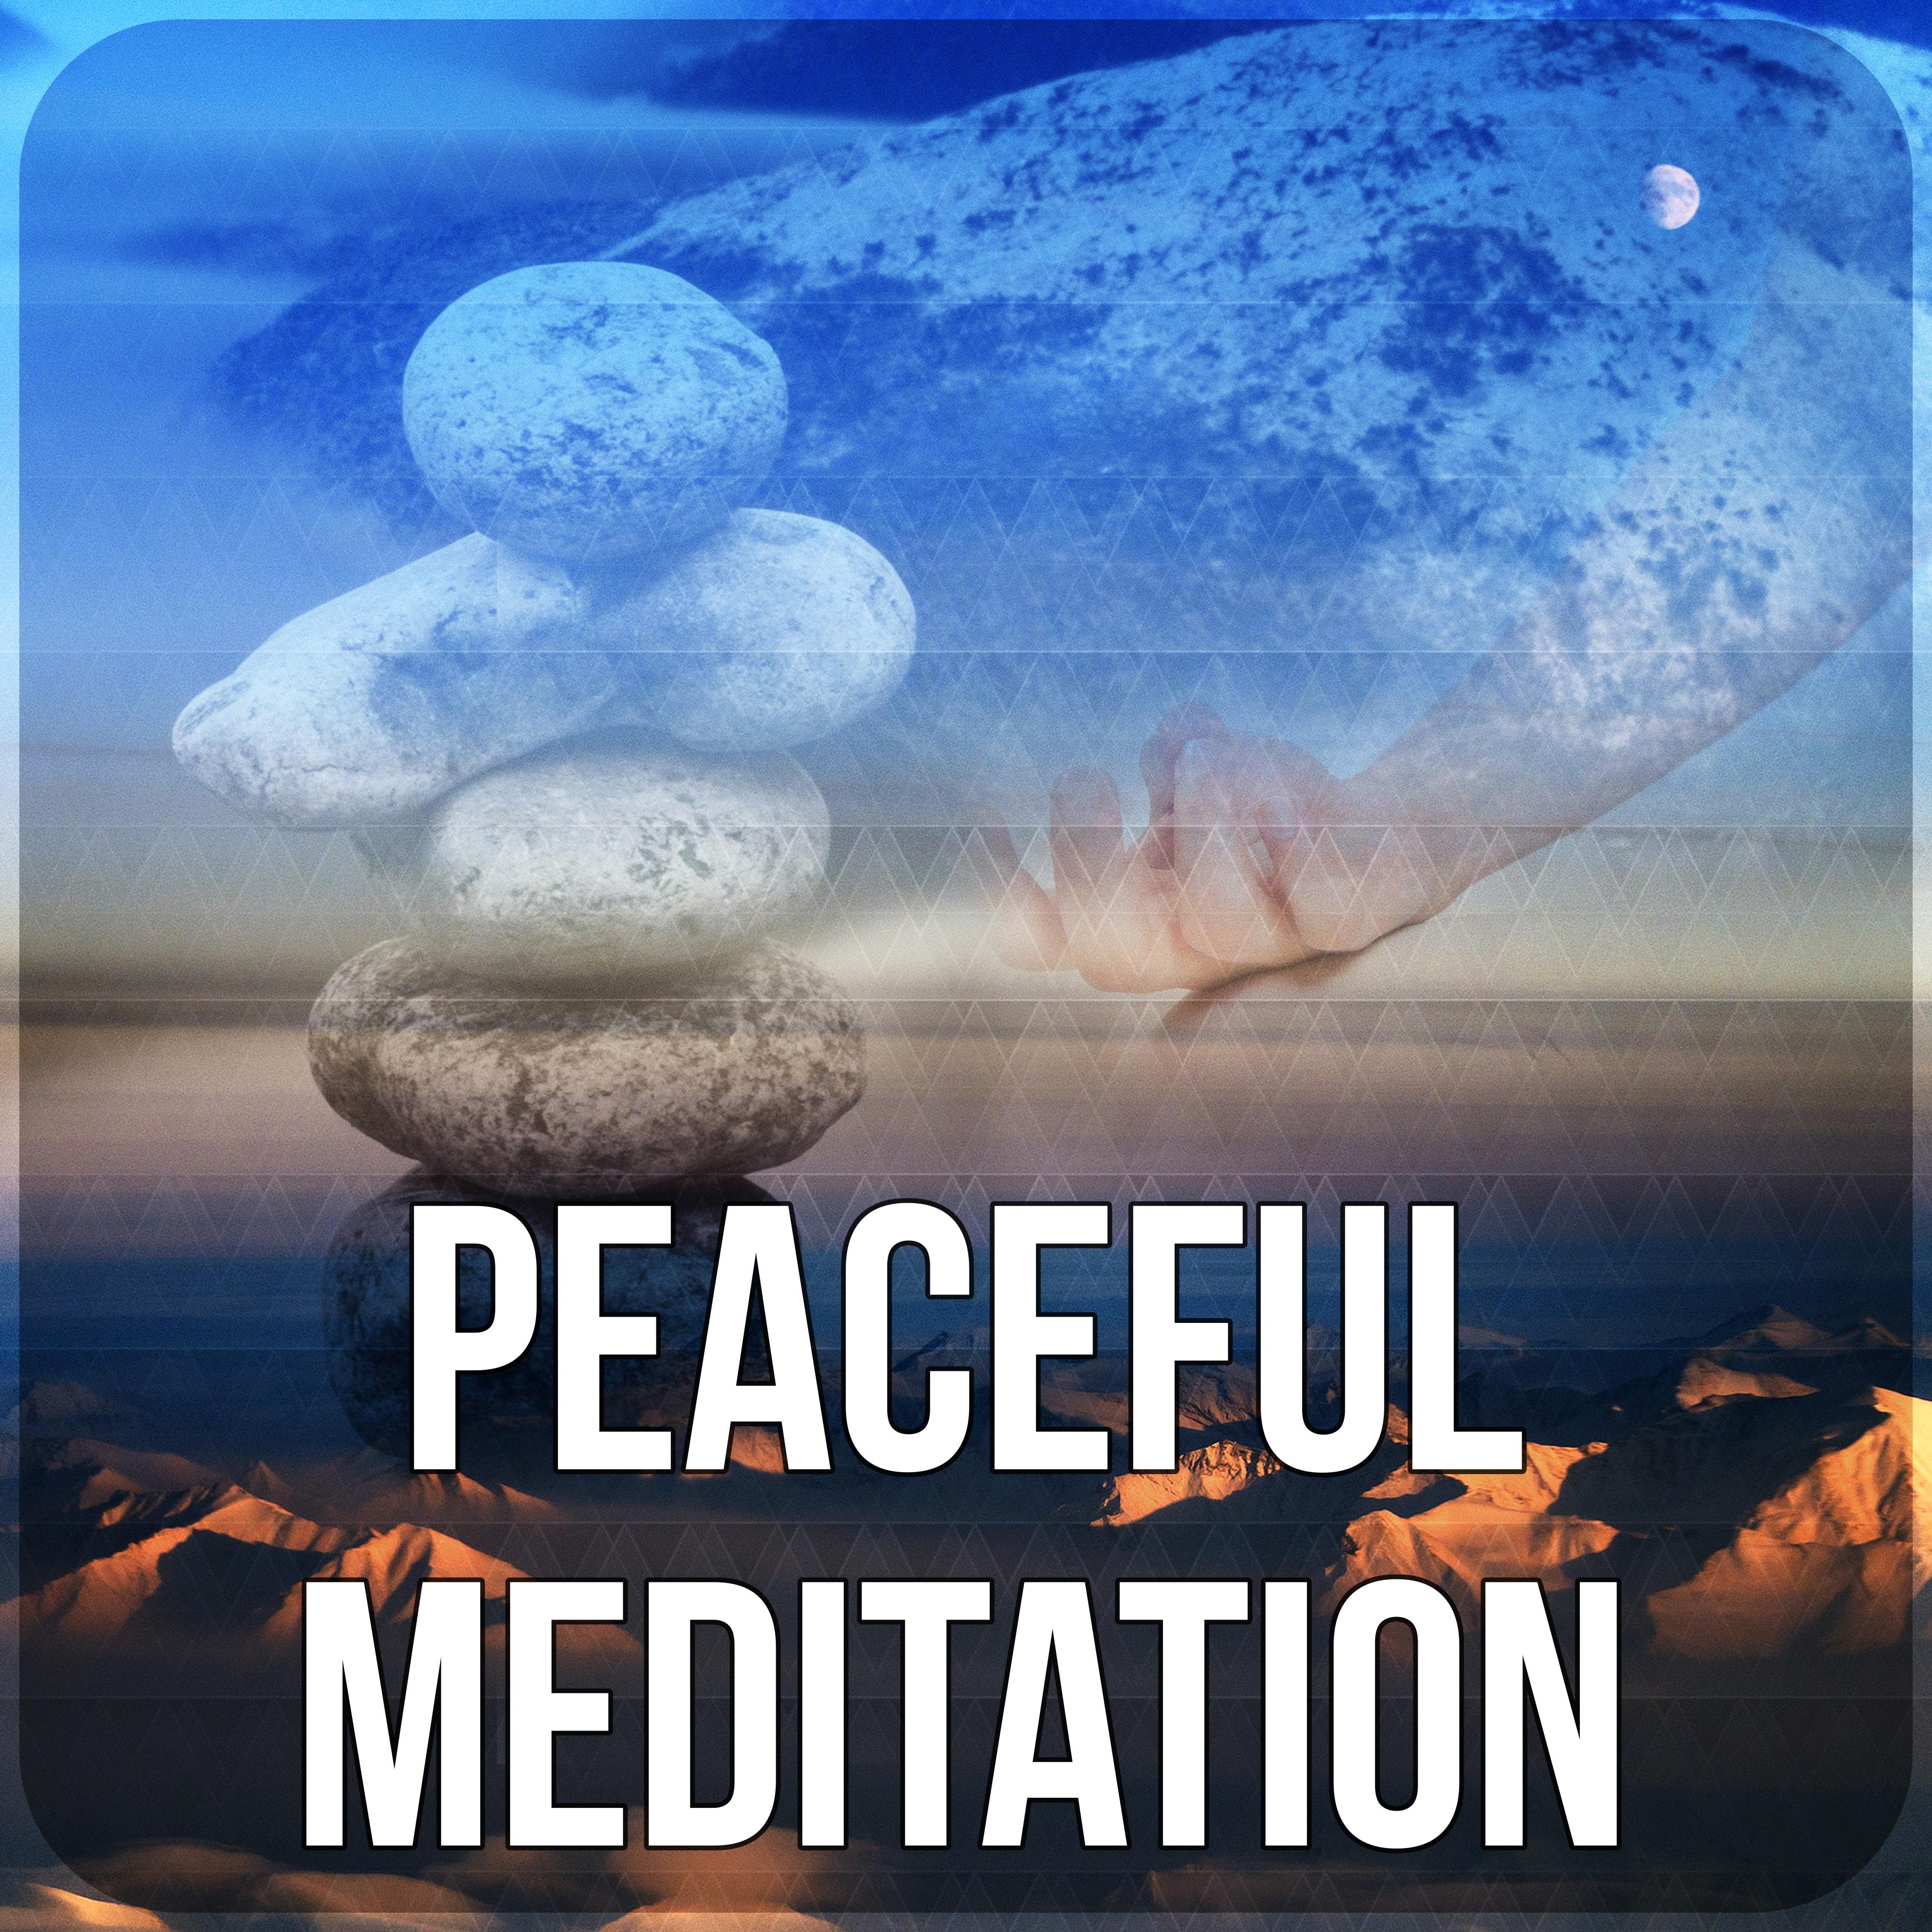 Peaceful Meditation – Zen Music, Reiki Healing, Mantras, Harmony & Serenity, Calming Sounds for Peace of Mind, Yoga Music